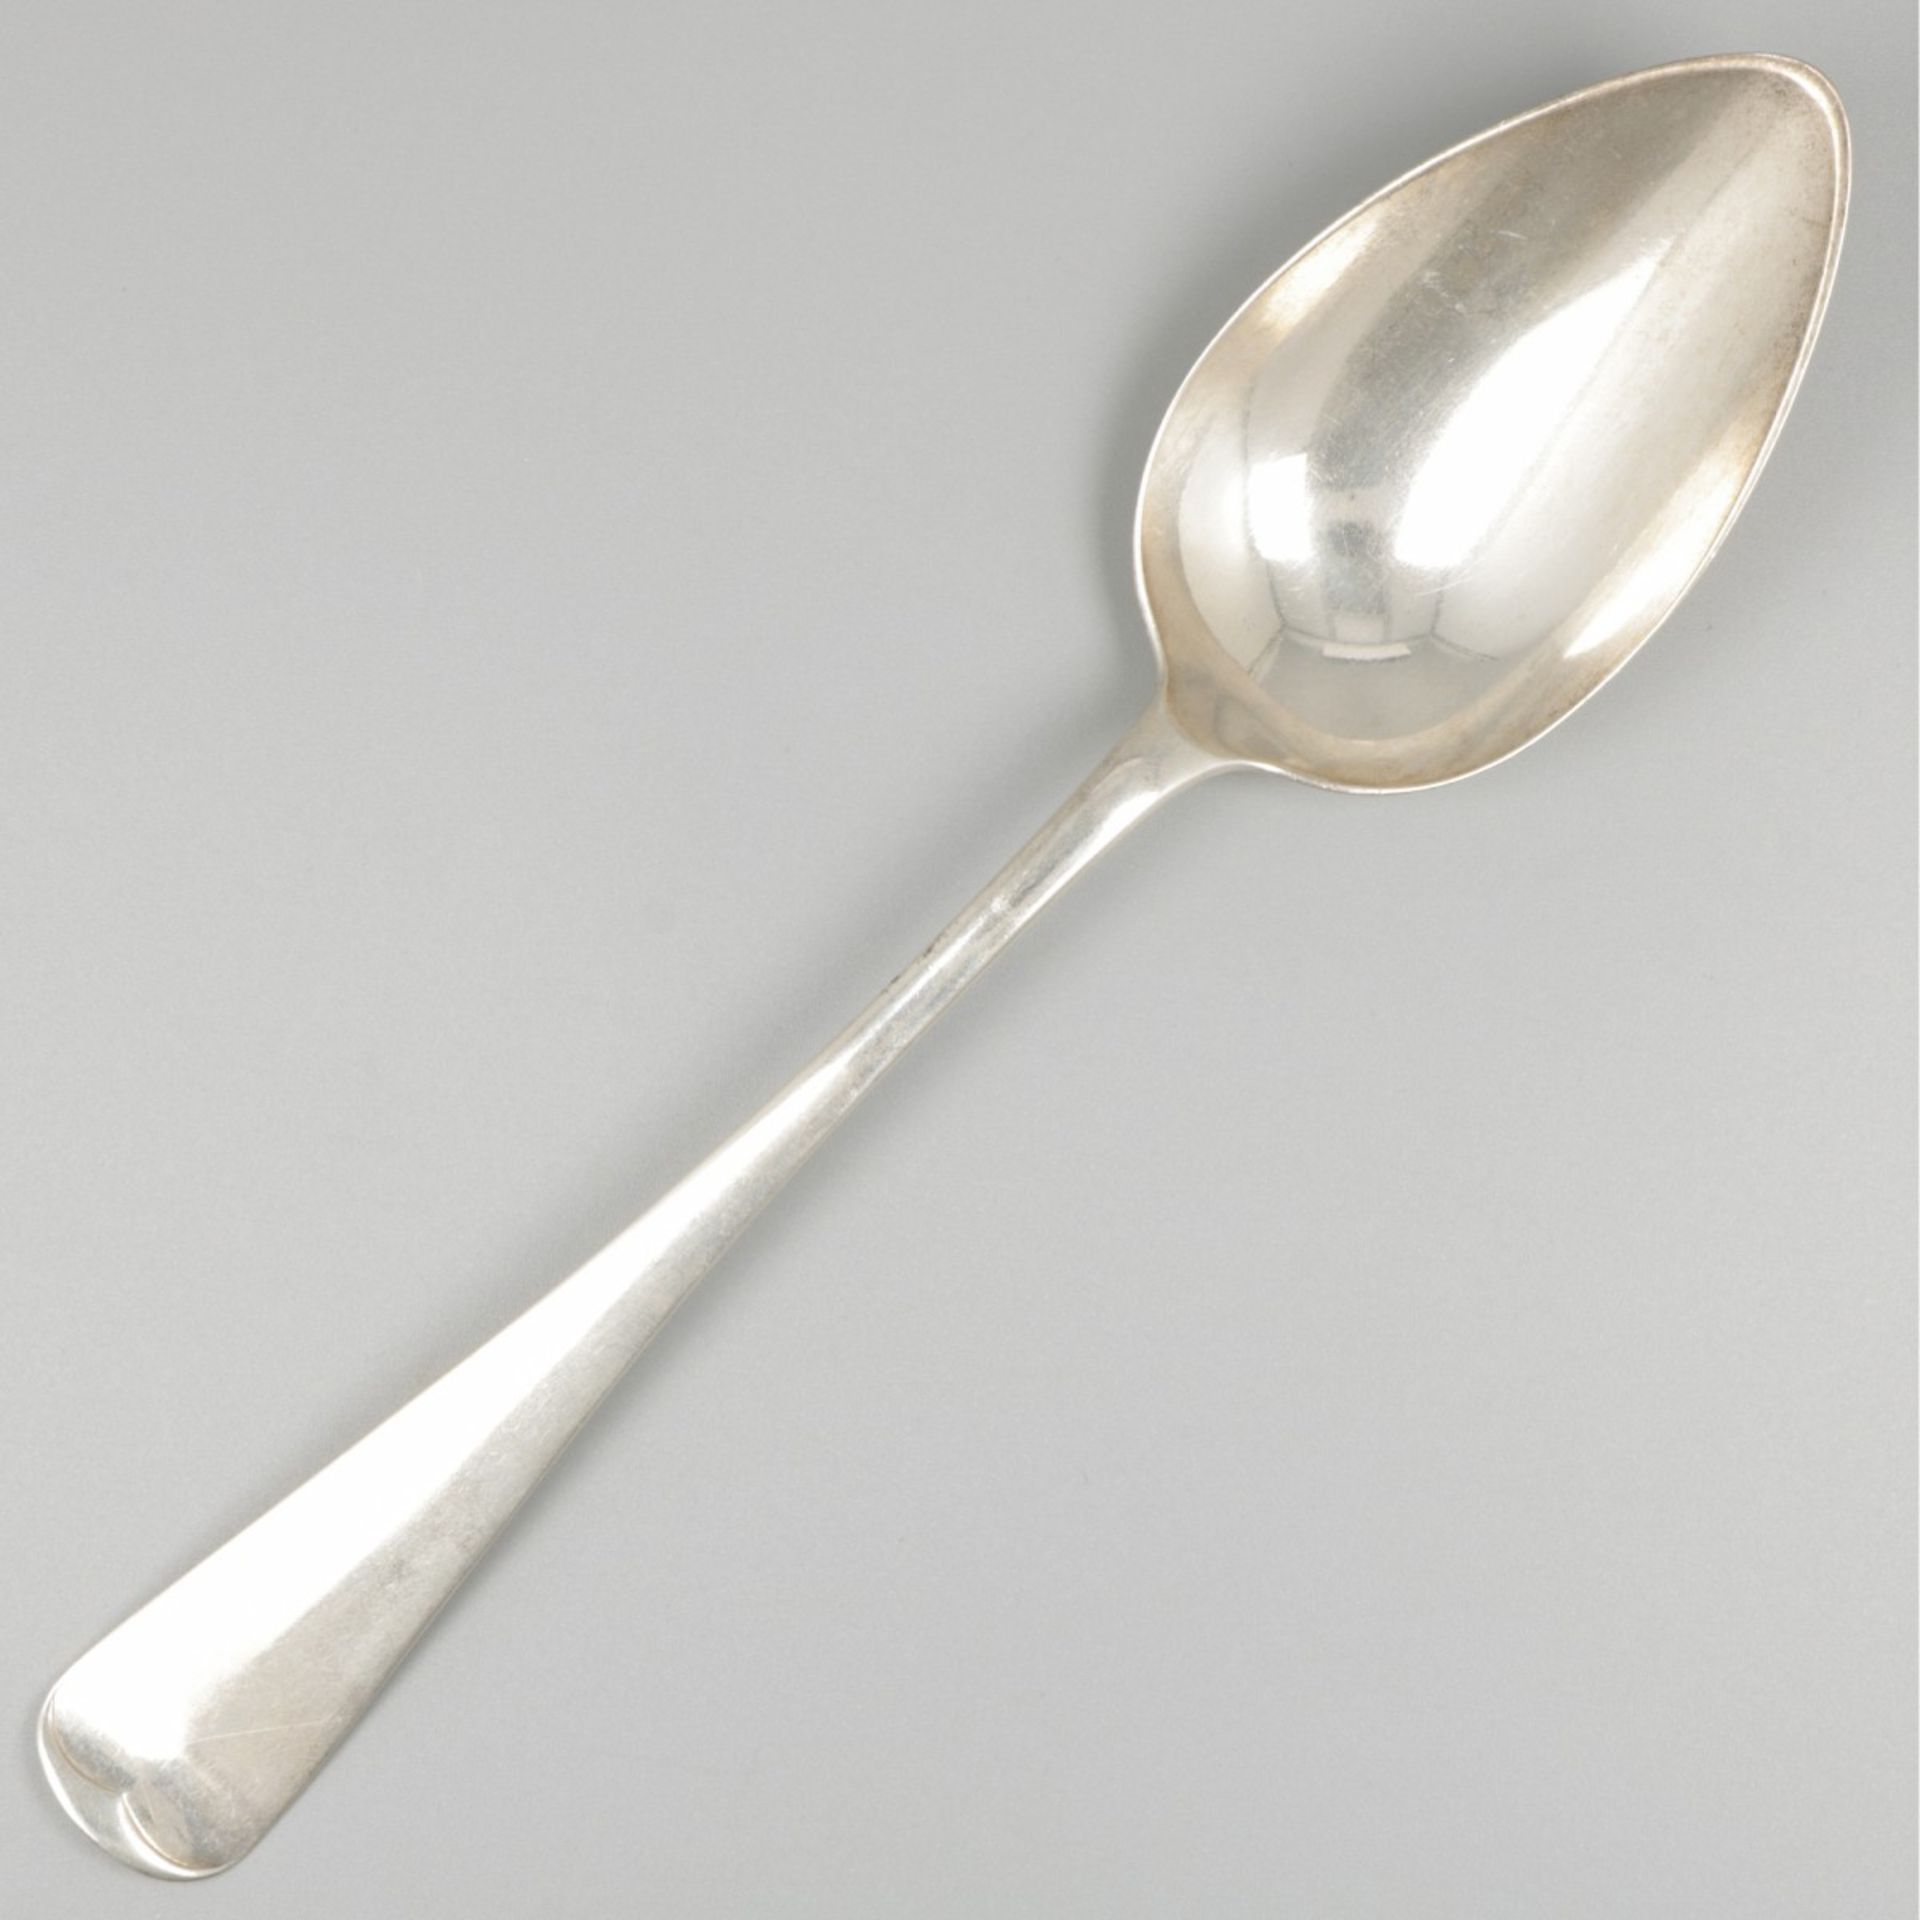 Salad servers ''Haags Lofje'' silver. - Image 8 of 9